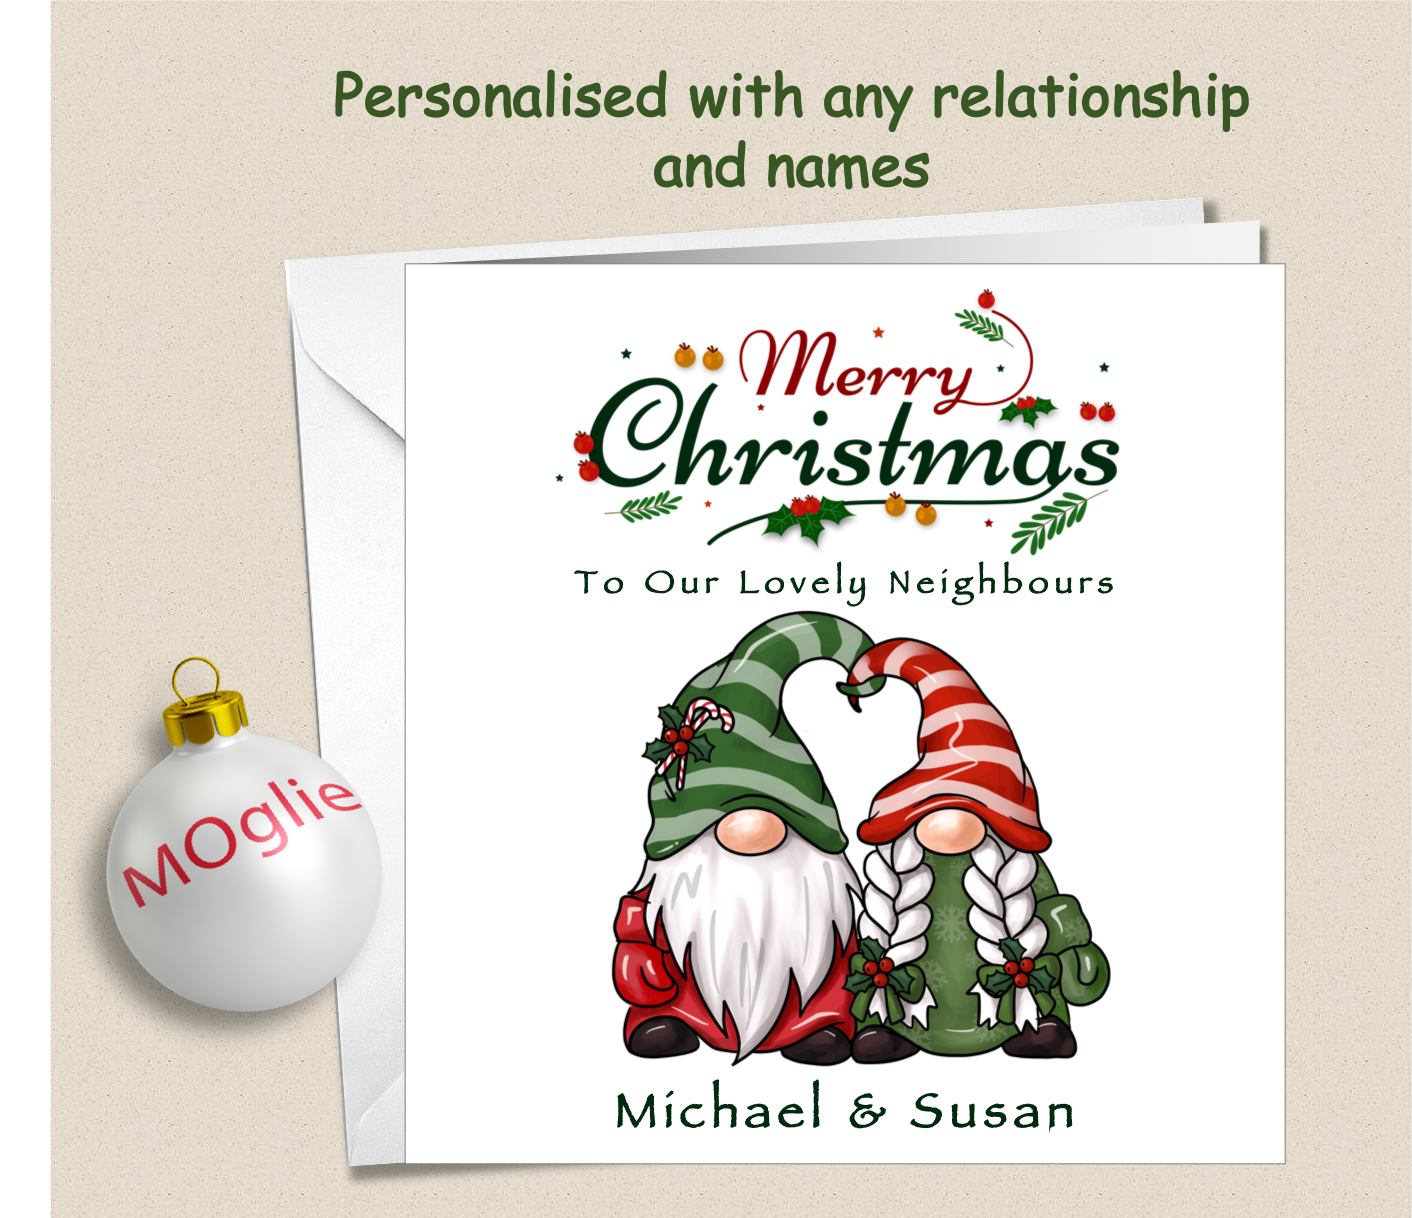 Personalised Christmas Card Couple Both of You - GONK1